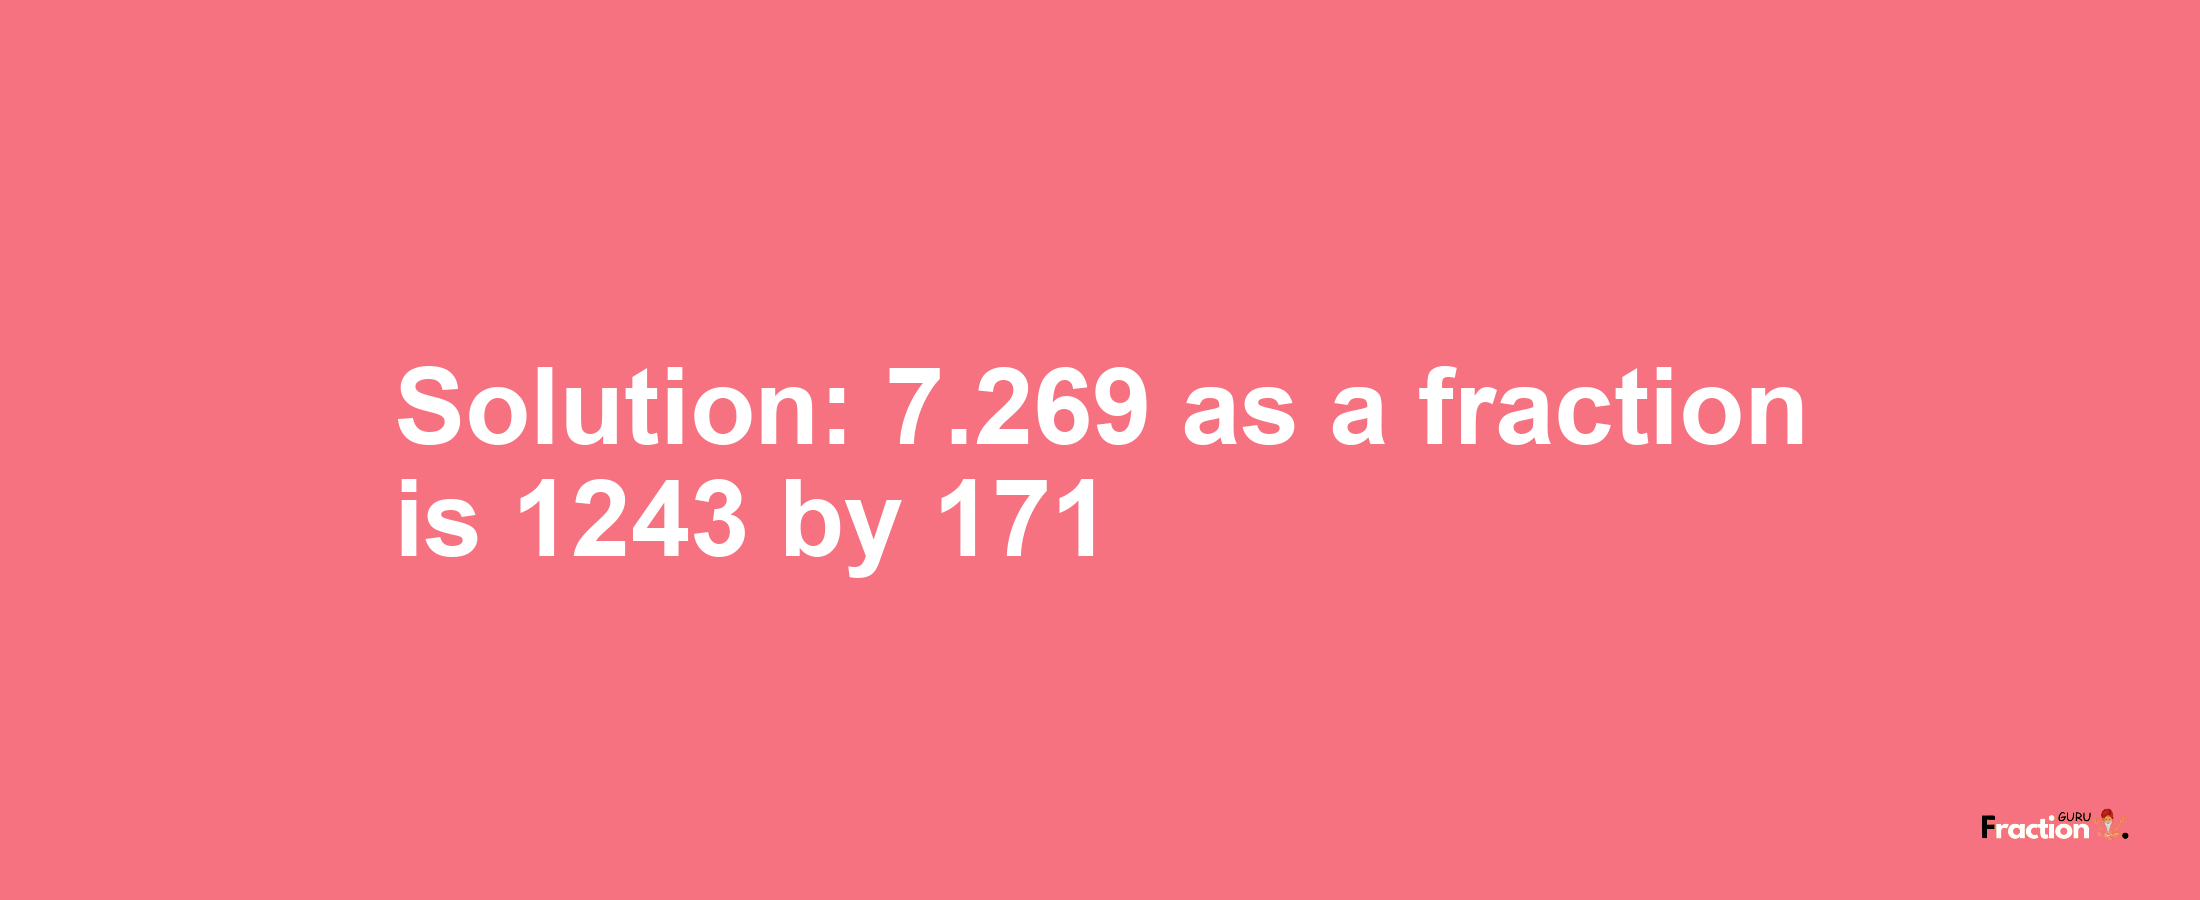 Solution:7.269 as a fraction is 1243/171